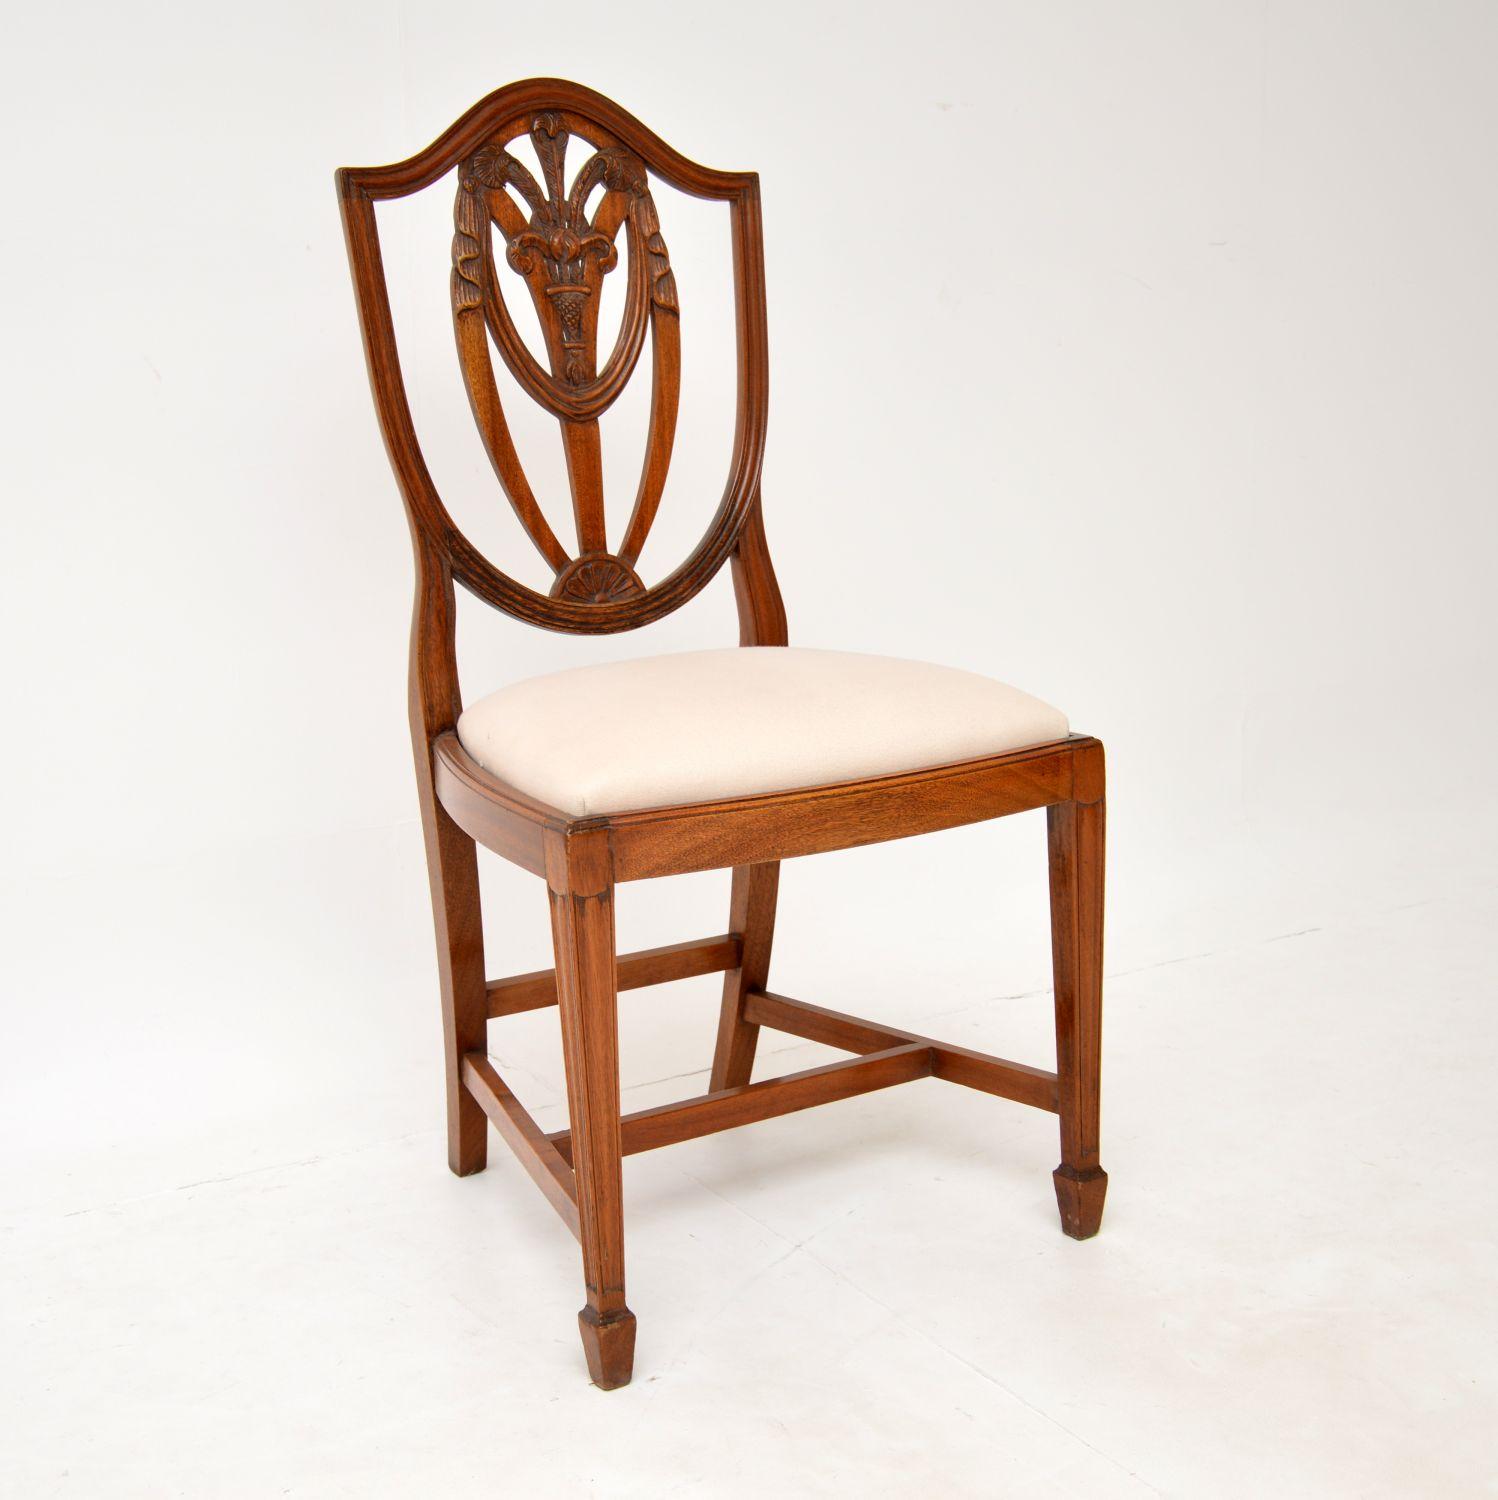 A fantastic set of eight solid wood shield back dining chairs in the antique Georgian style. These were made in England, they date from around the 1930’s.

They are of superb quality, with fabulous carving depicting Prince of Wales feathers. They